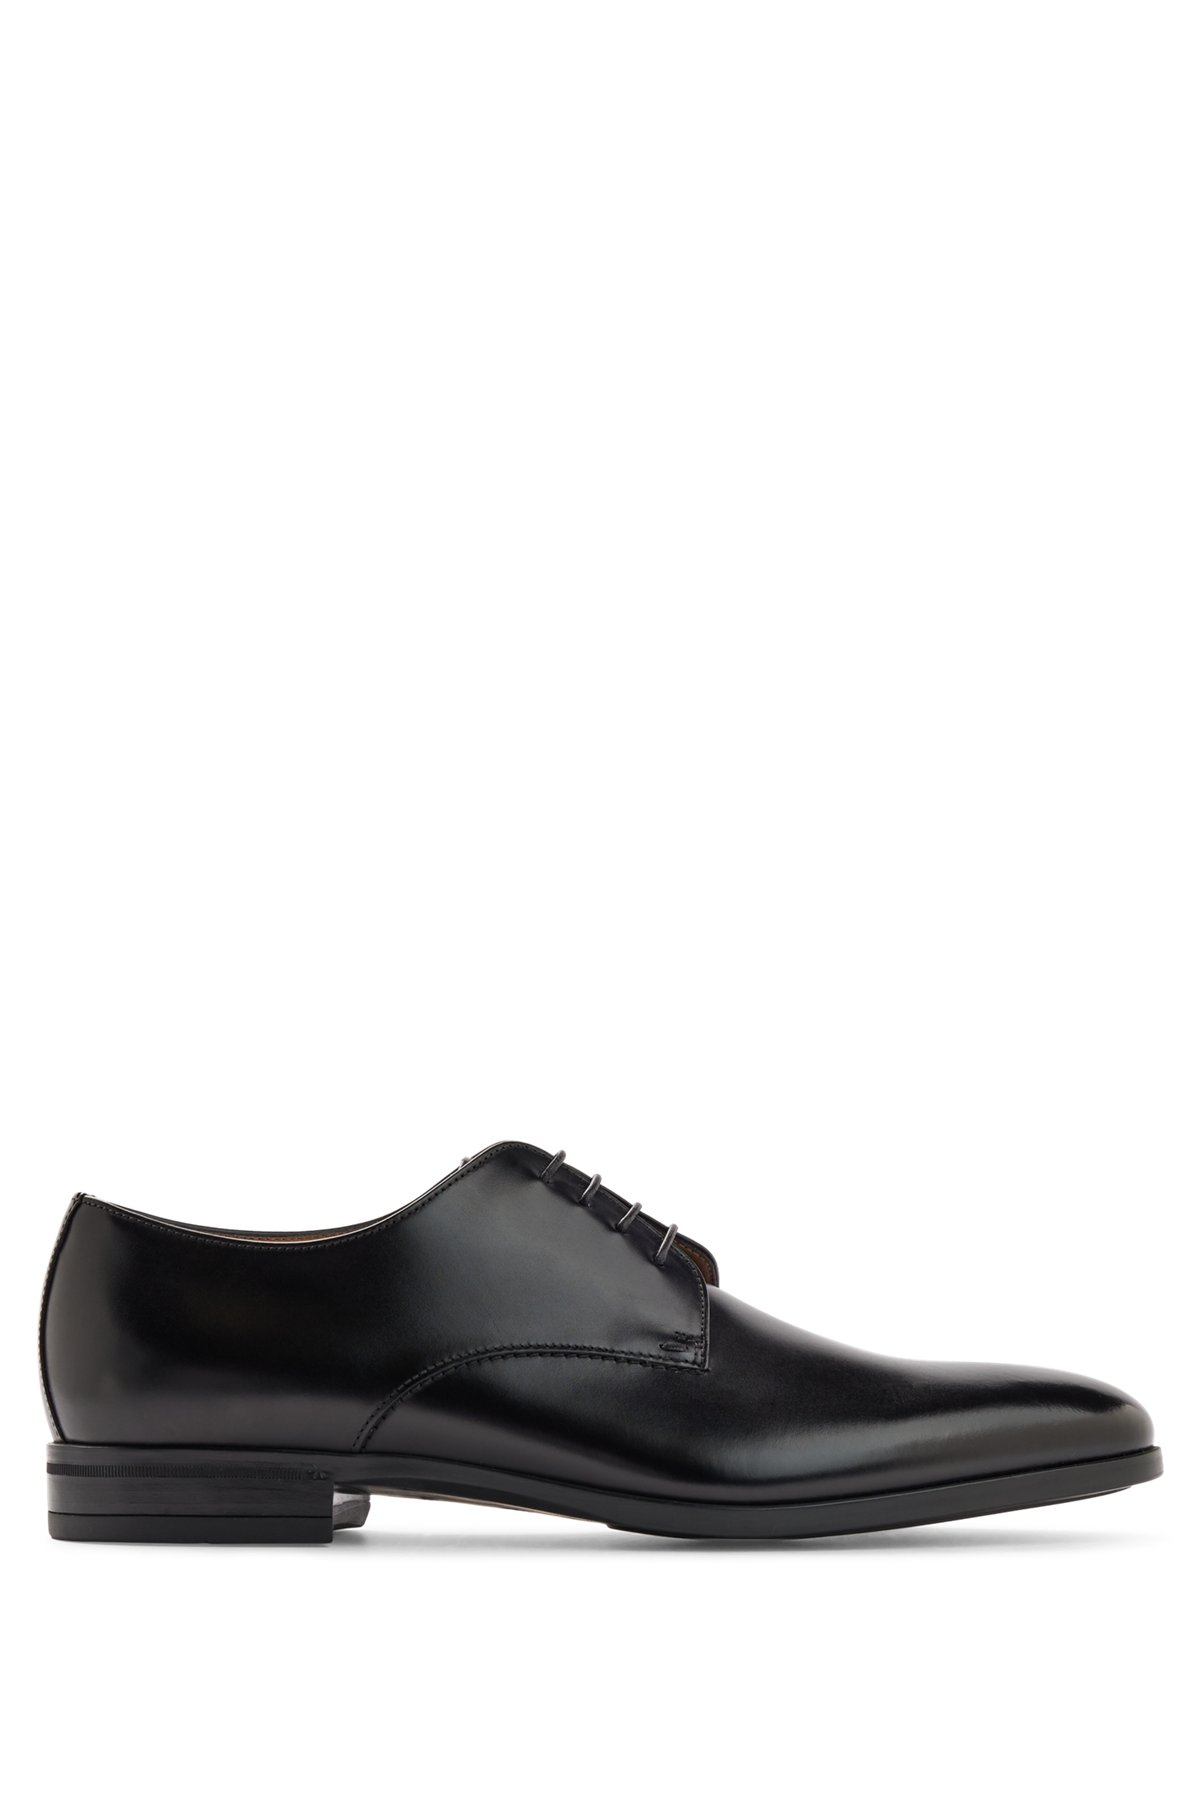 fact Overdraw Oxidize BOSS - Italian-made Derby shoes in vegetable-tanned leather